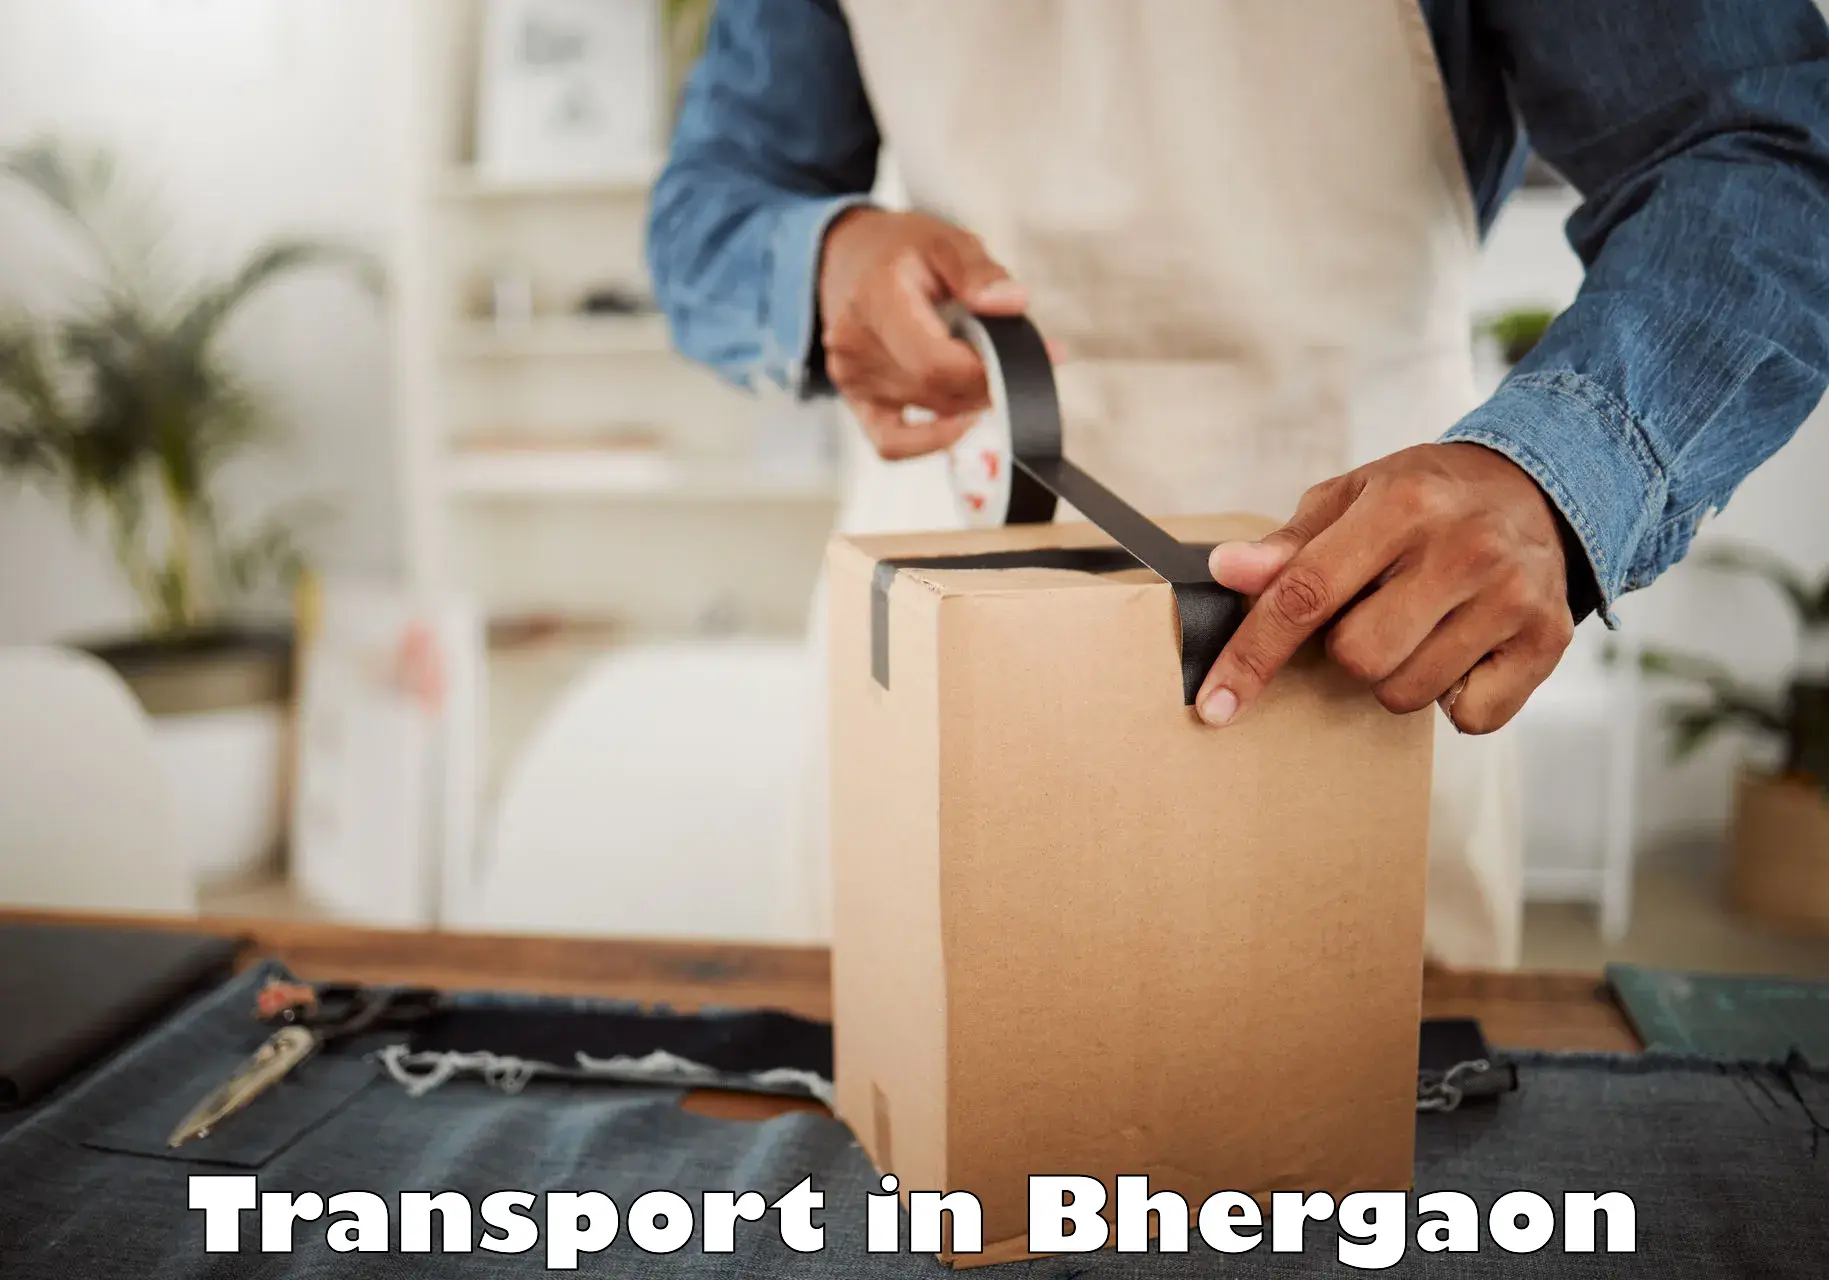 Two wheeler transport services in Bhergaon